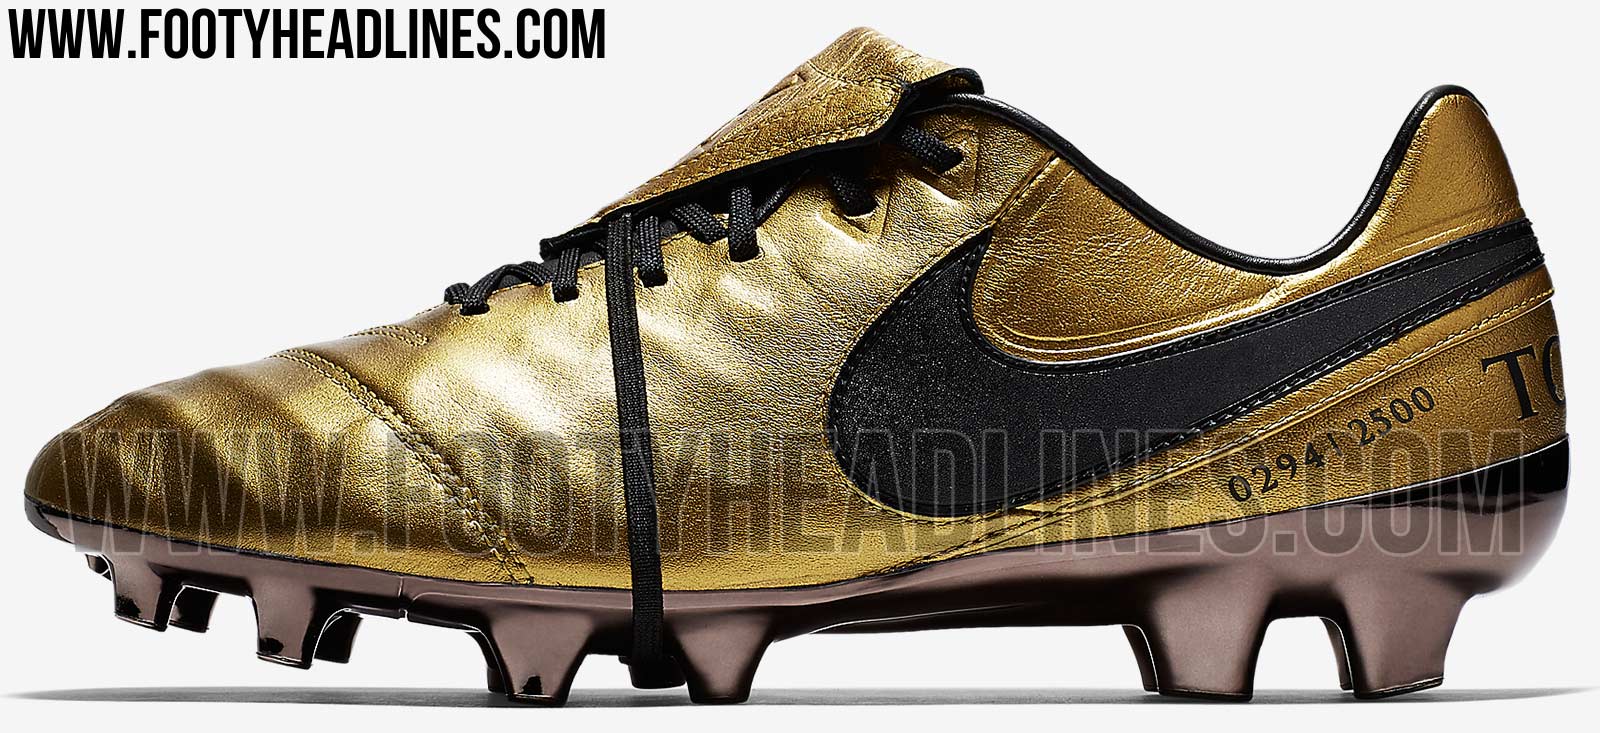 Totti Roma Signature Boots Released - Footy